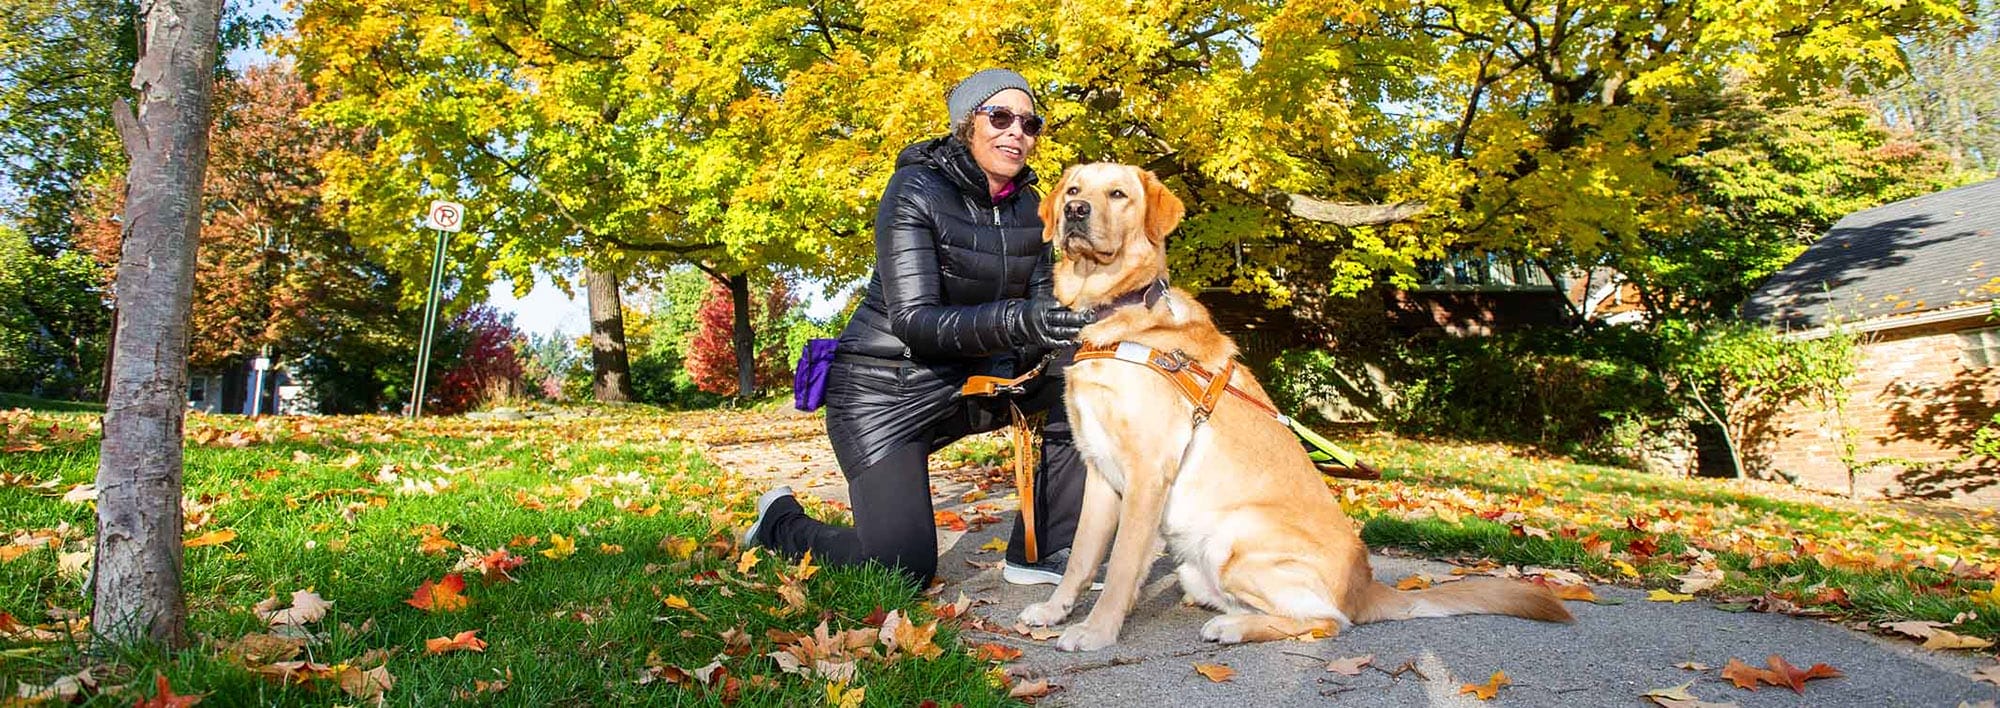 A smiling woman in a black puffy jacket kneels on a sidewalk with her hands on a seated yellow lab in harness. There are fall leaves on the sidewalk and grass around them